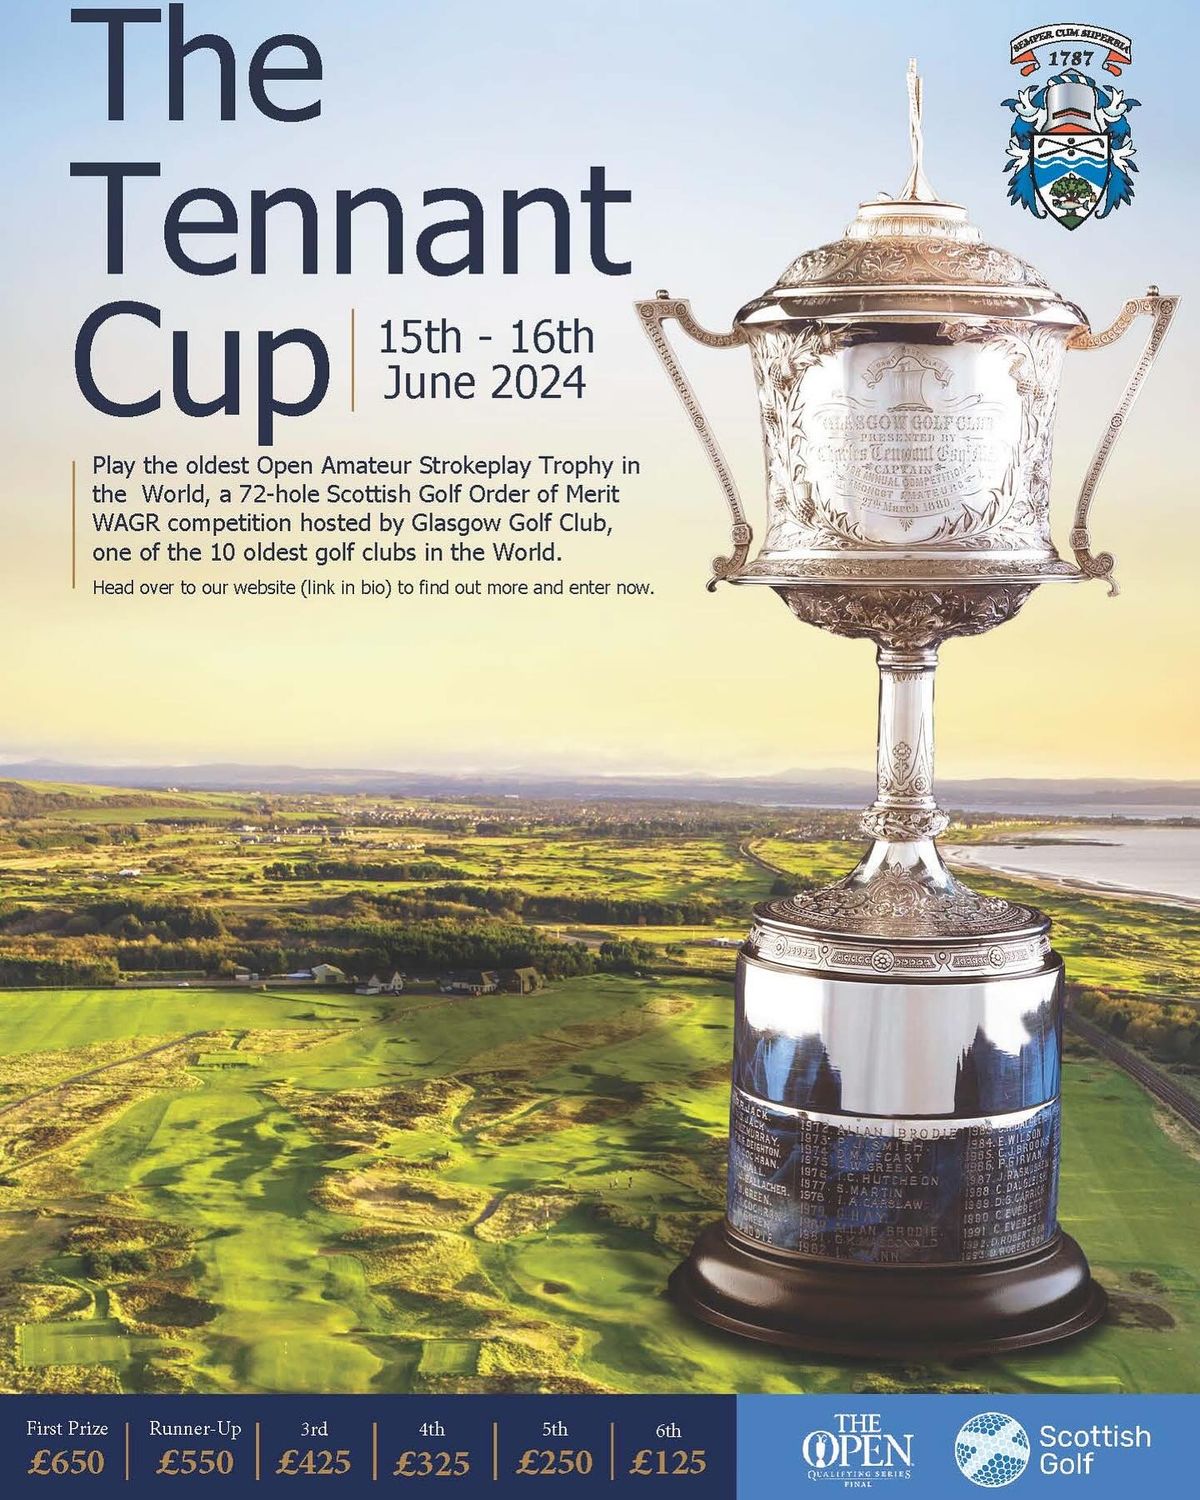 The Tennant Cup